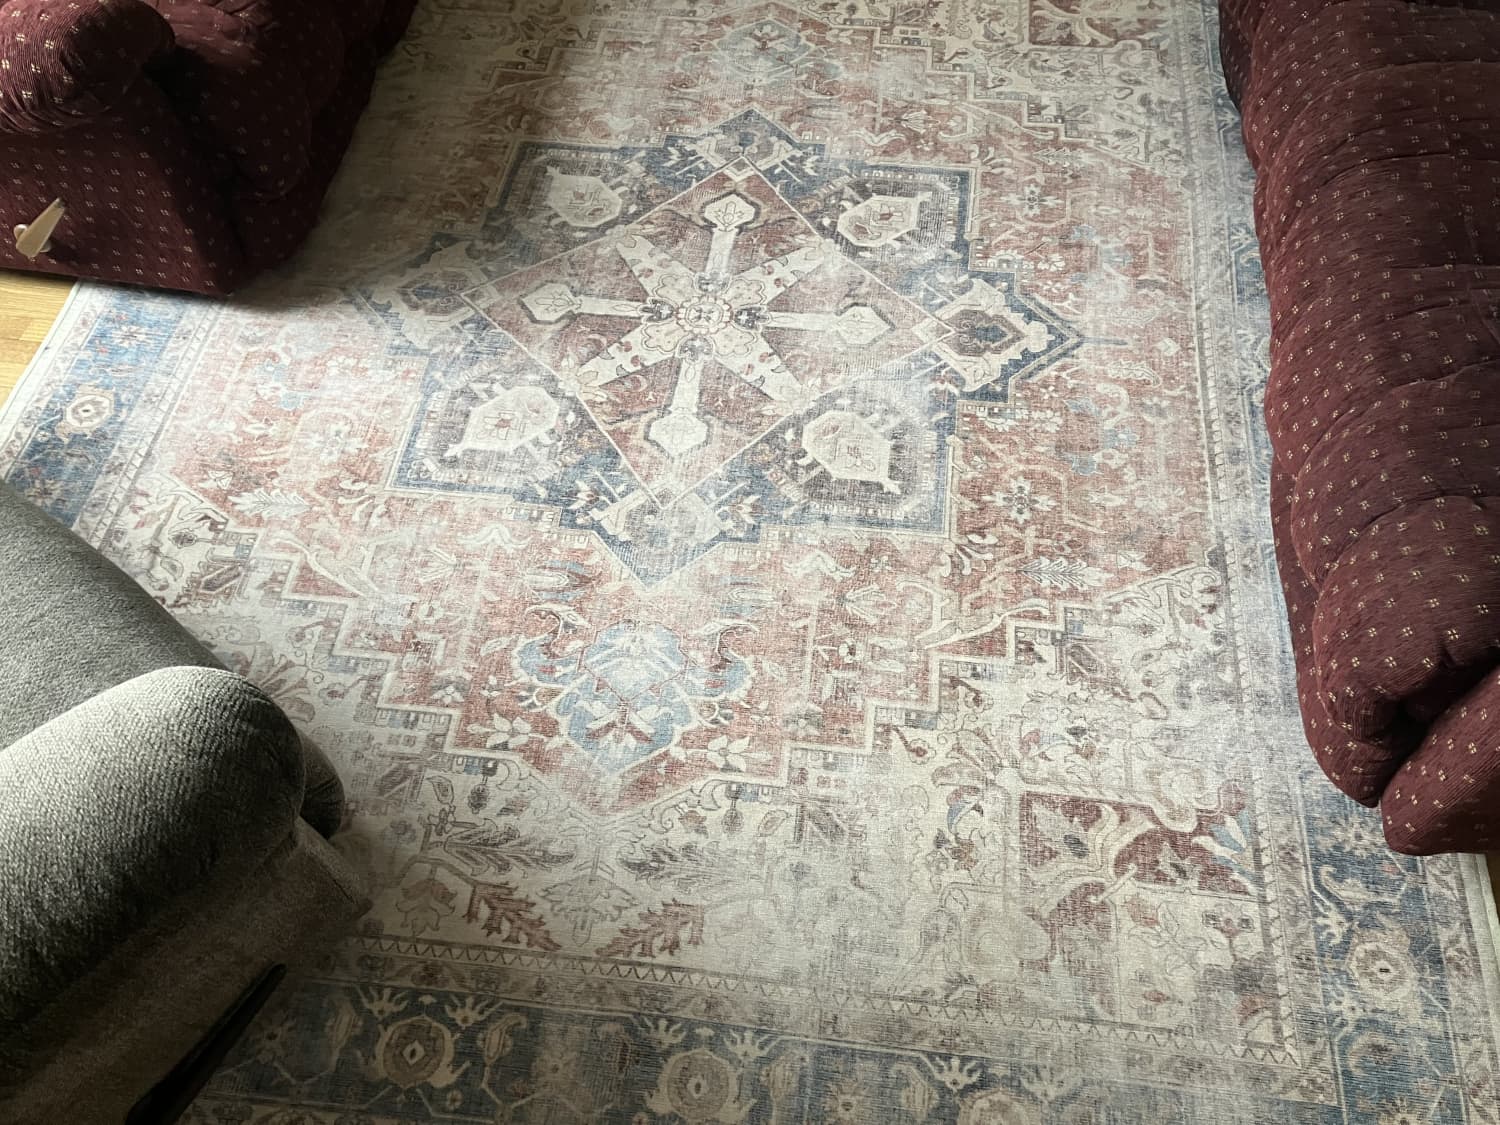 After Six Months, My Ruggable Rug Is Almost My Favorite Decor